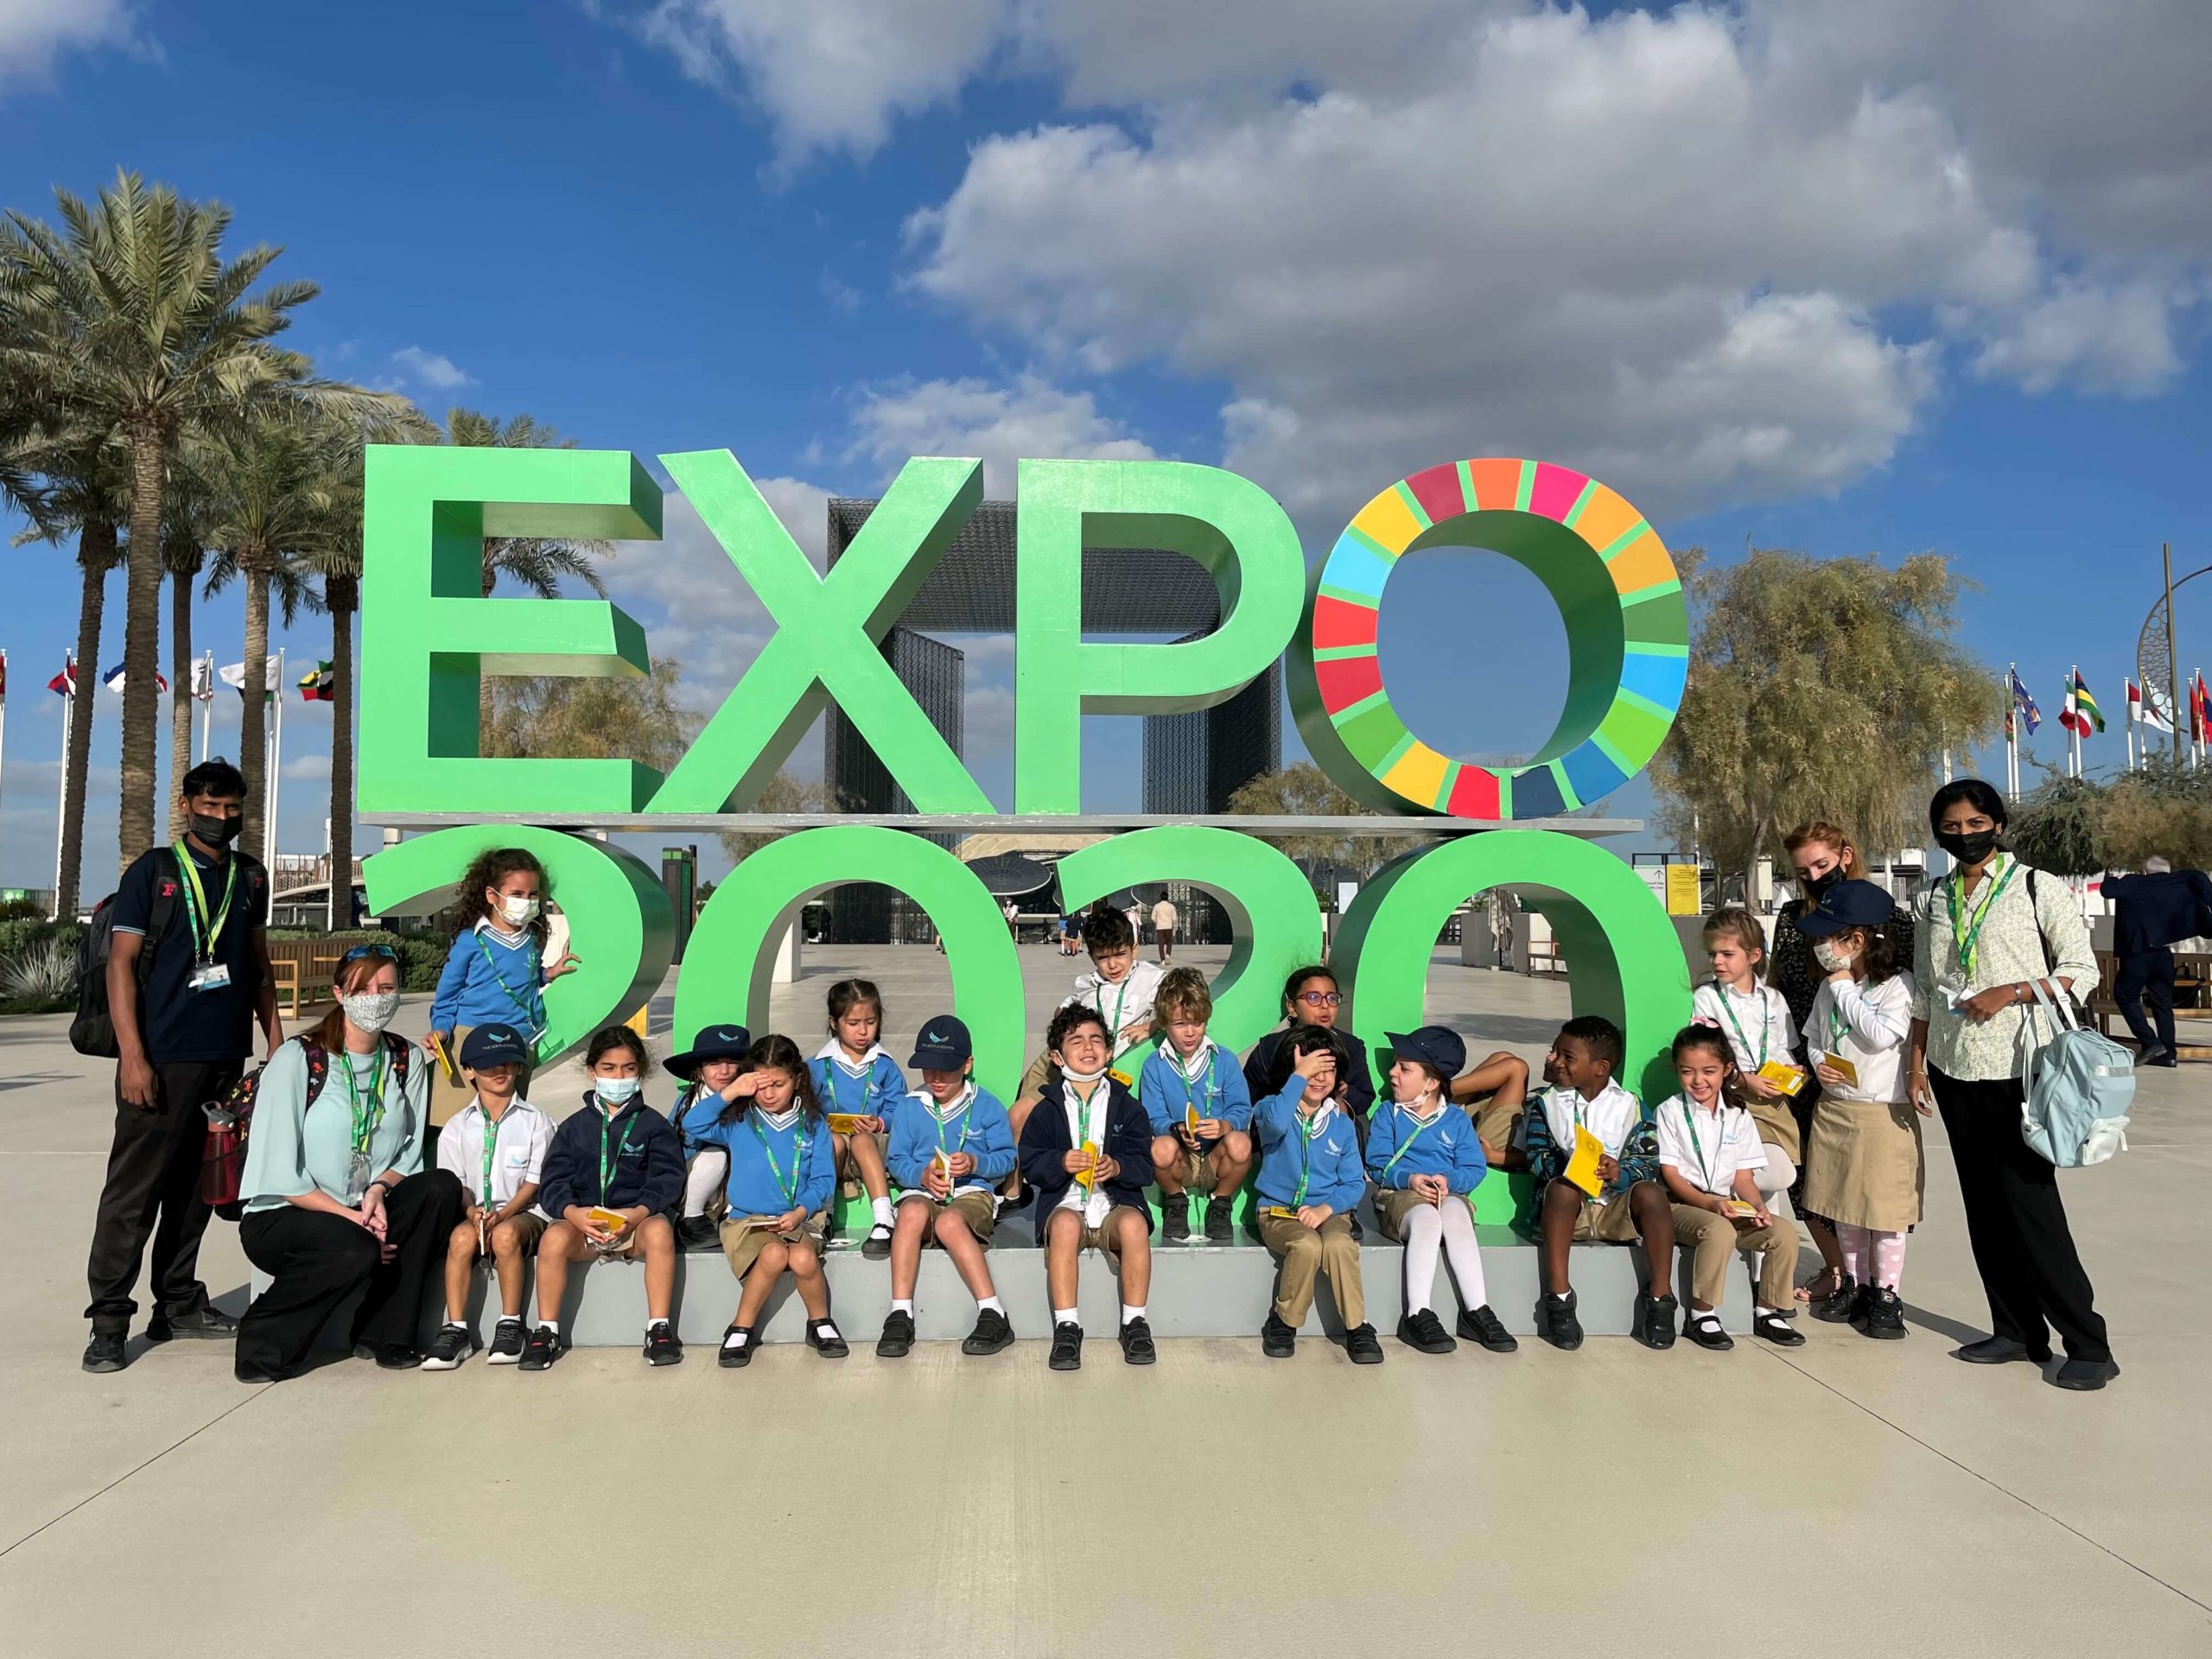 Expo 2020 Trip: first school trip since the pandemic